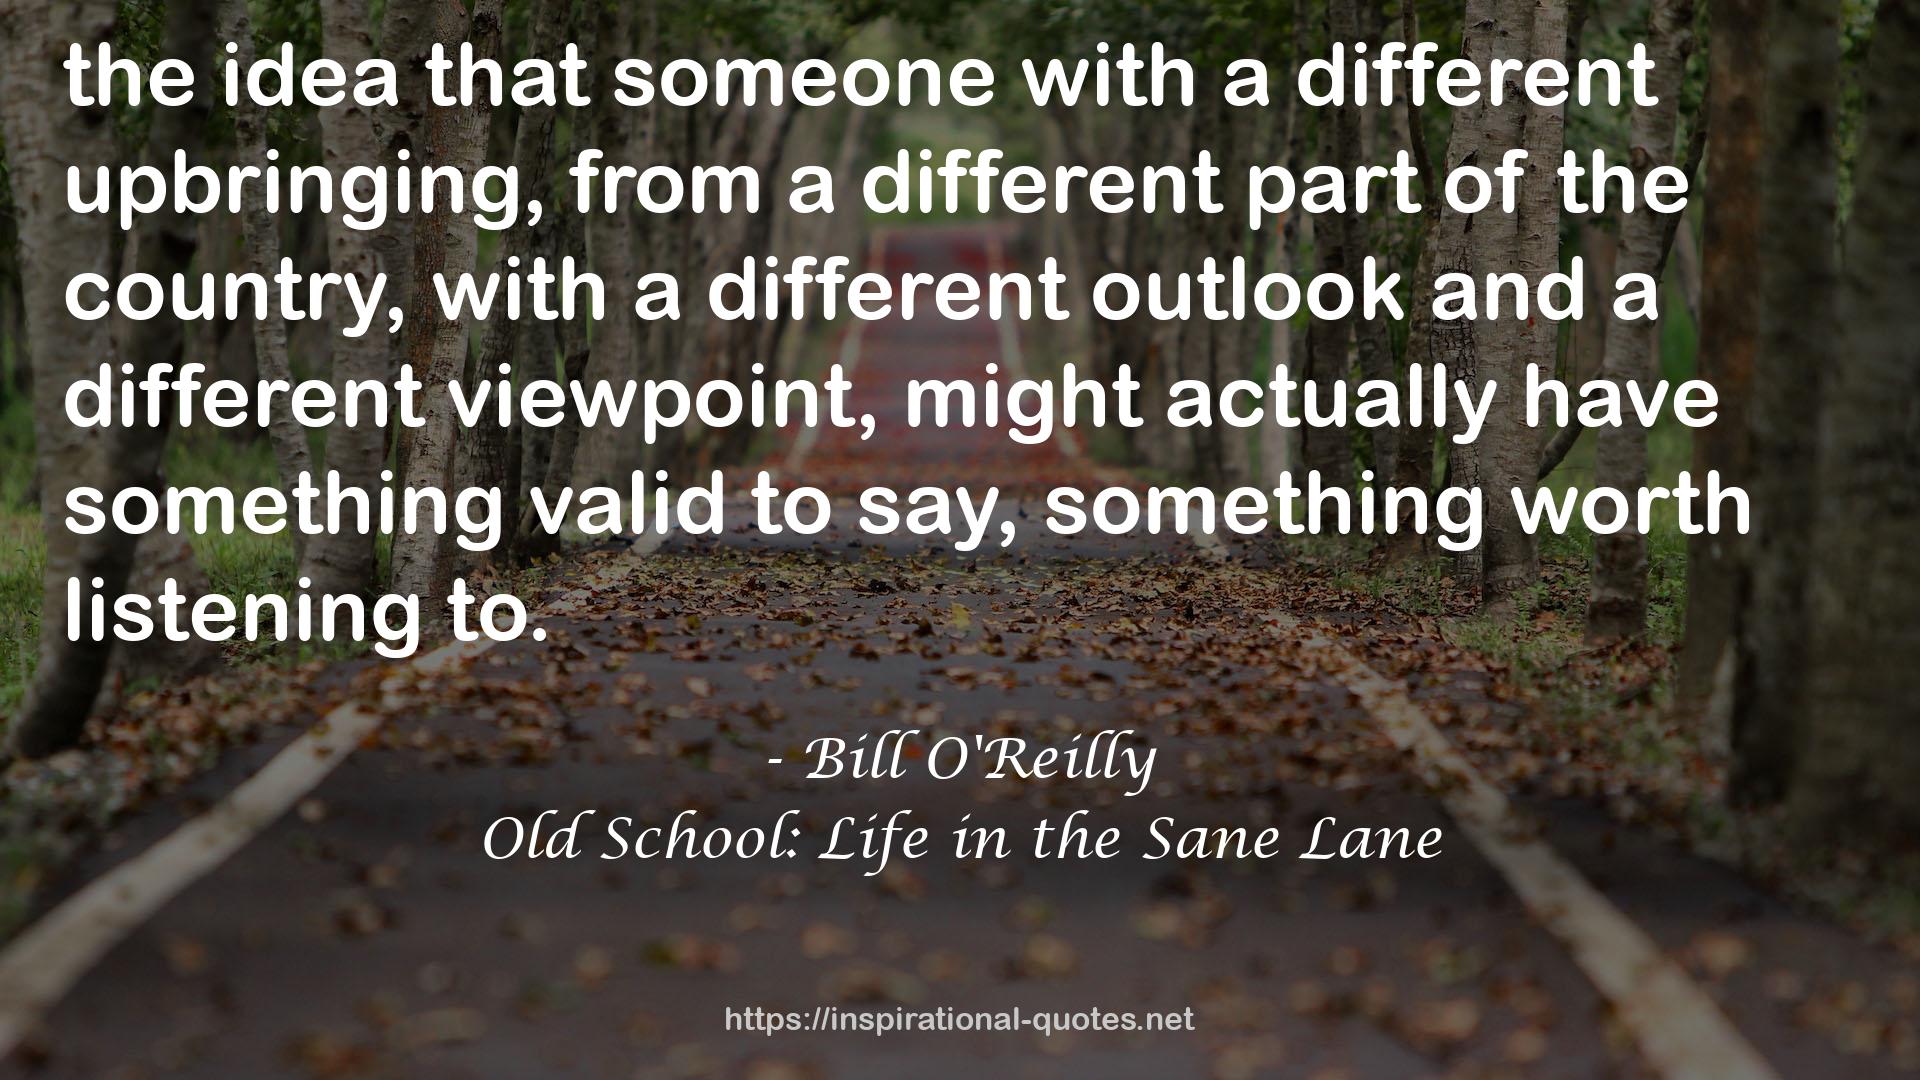 Old School: Life in the Sane Lane QUOTES